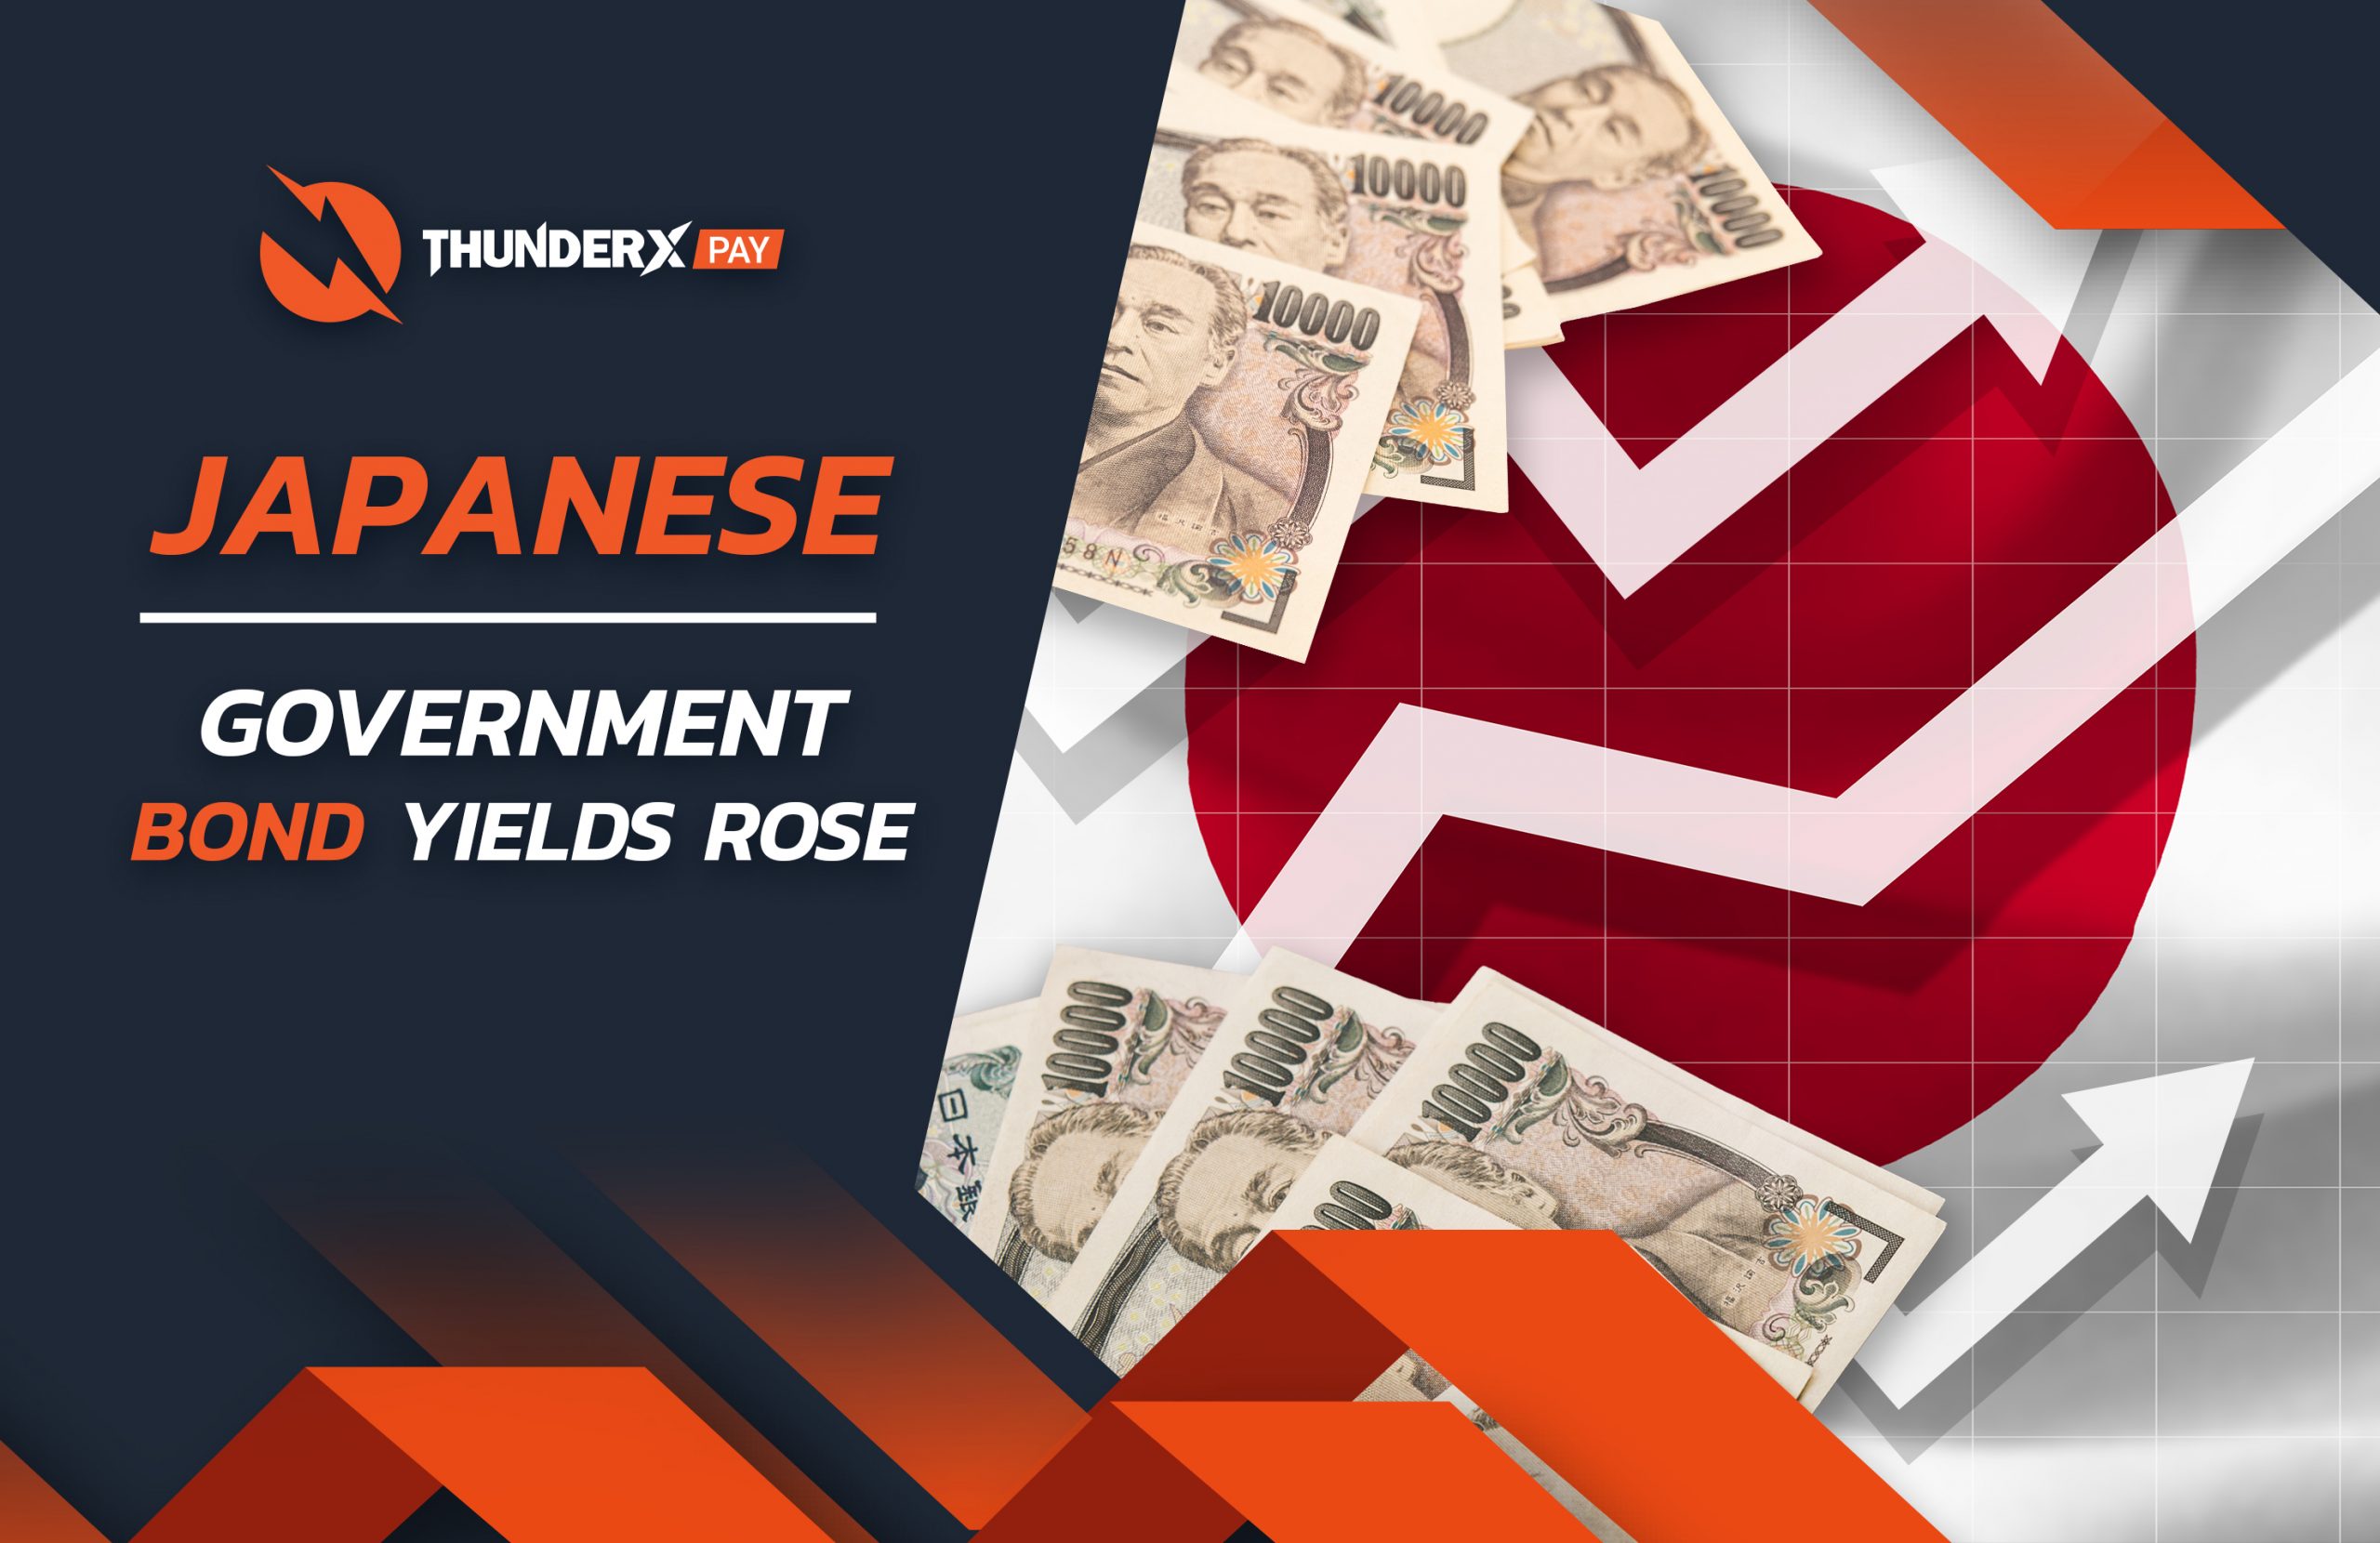 Japanese government bond yields increased